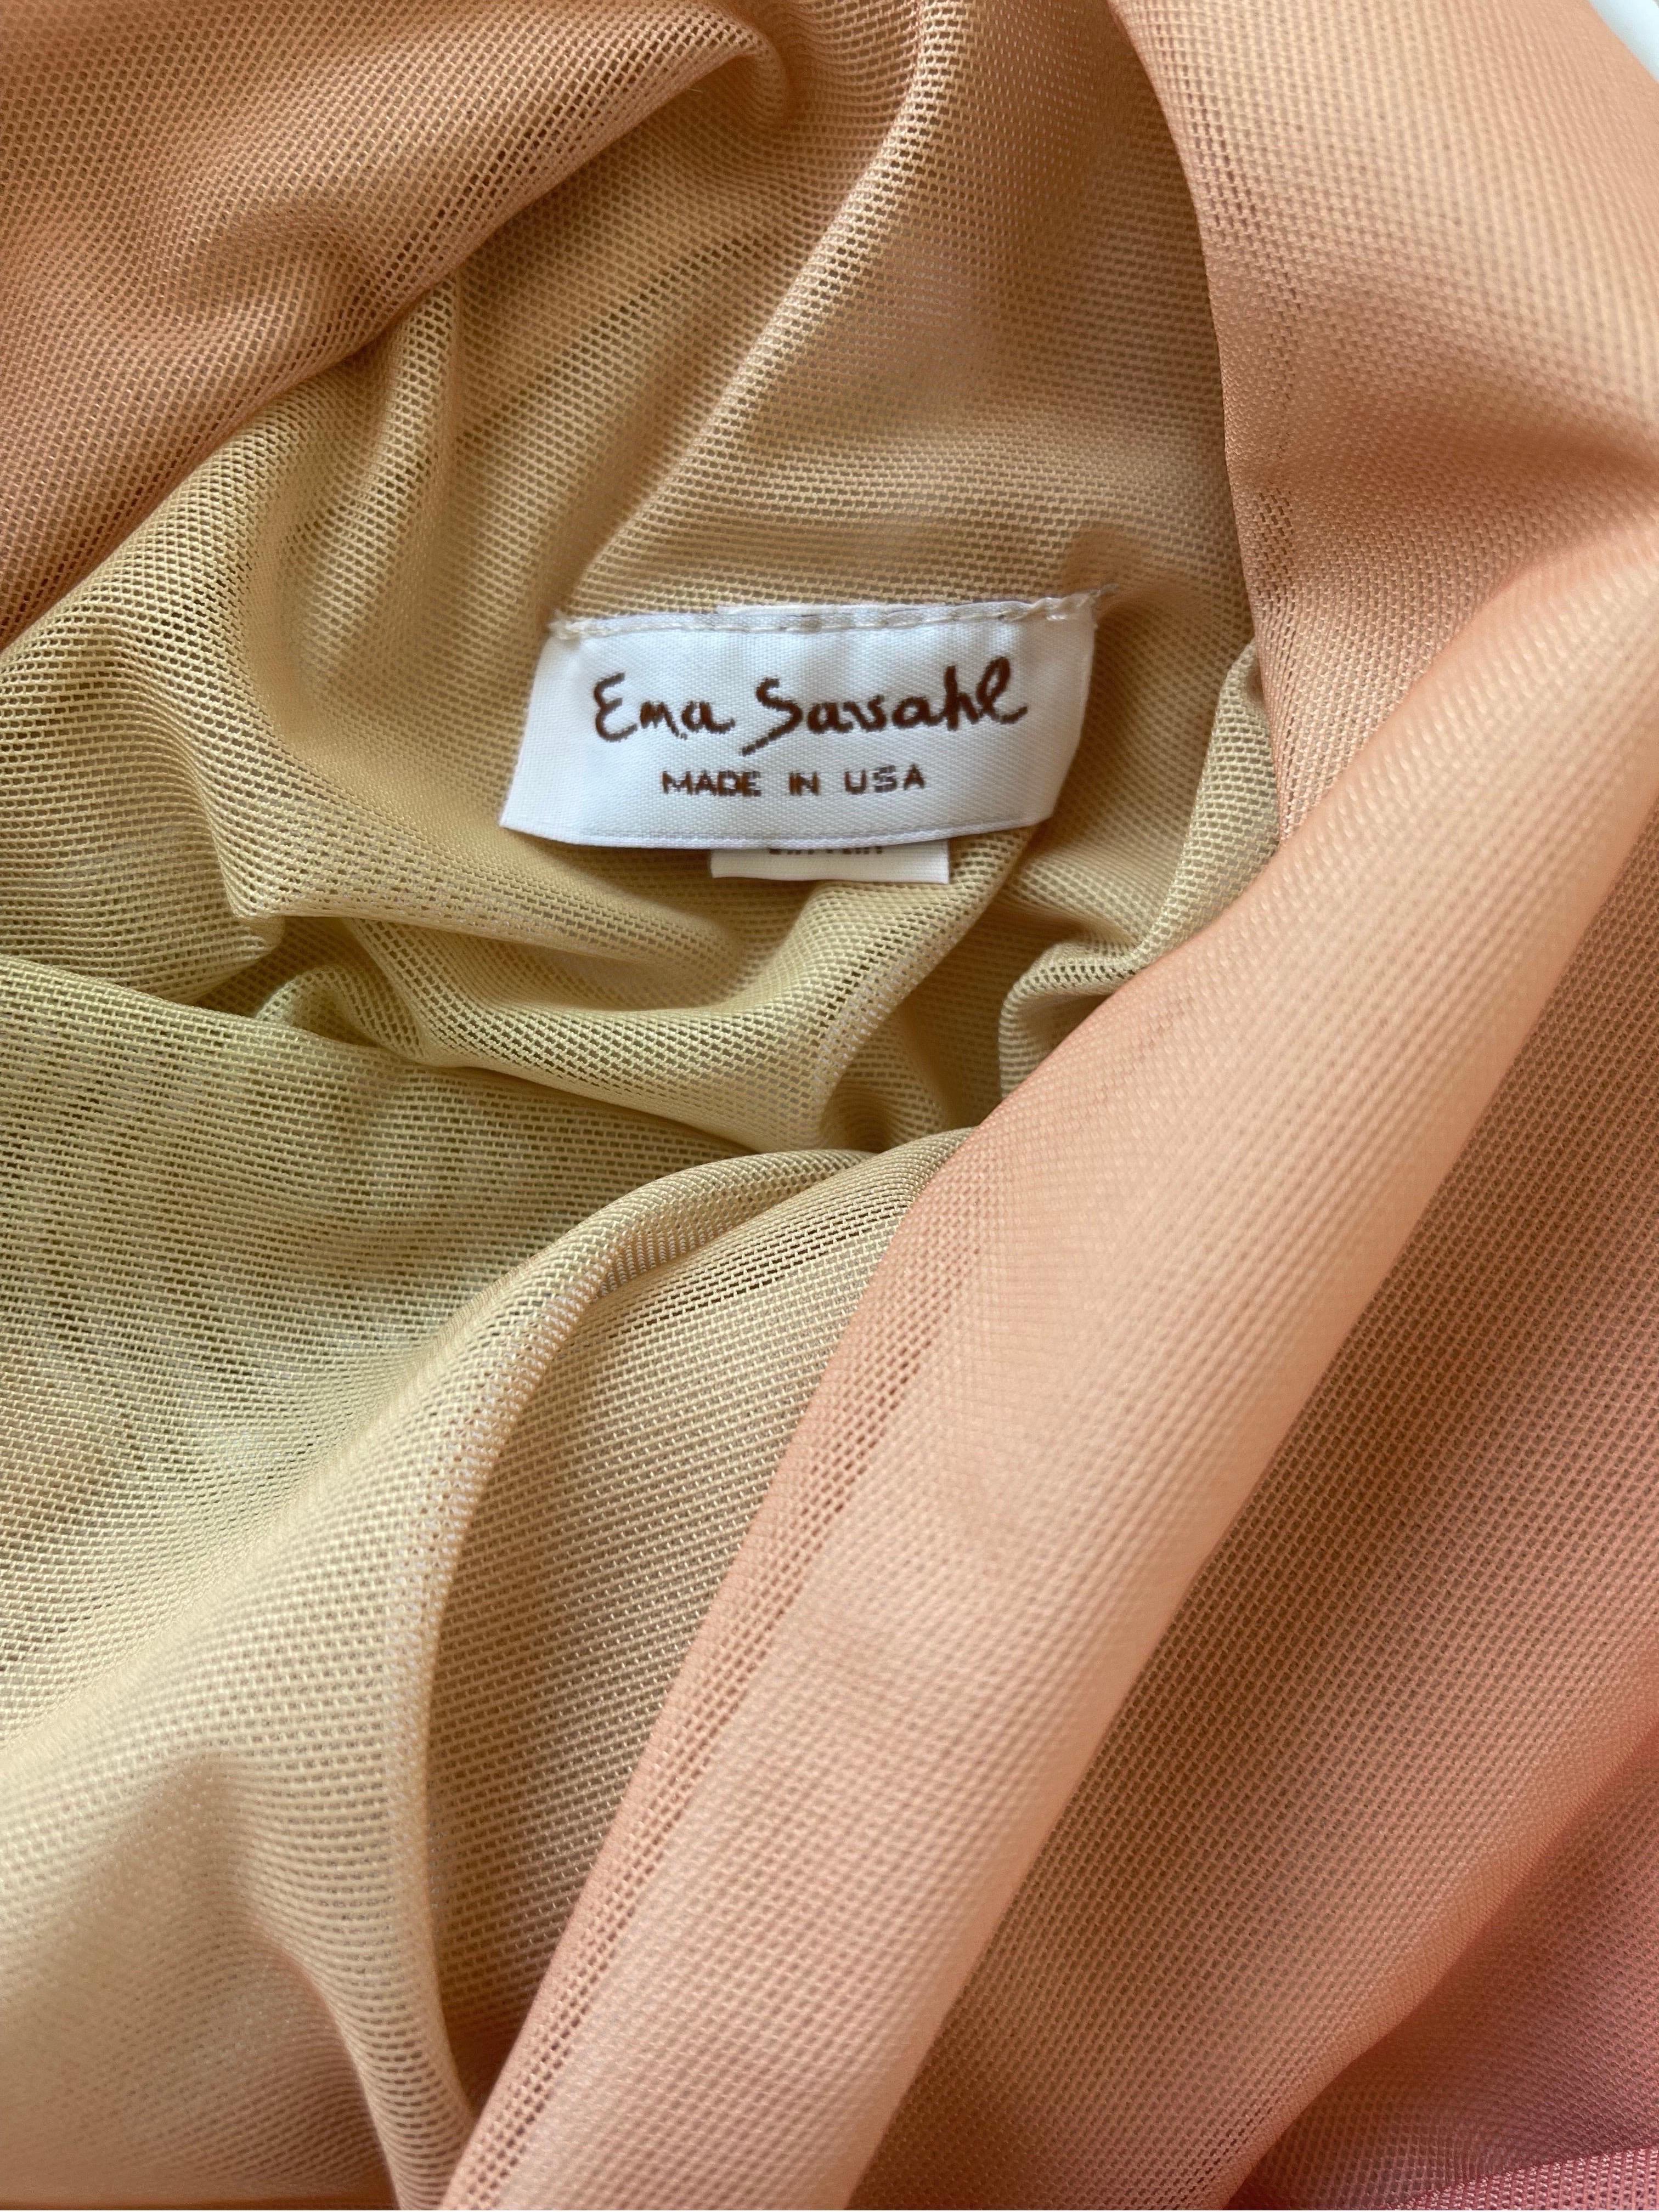 Sexy early 2000s vintage EMA SAVAHL hand dyed ombré orange and neon yellow hi-lo halter mesh dress ! 
Paris Hilton famously wore an Ema Savahl ensemble to the MTV movie awards in 2002. 
This rare gem simply slips on and ties around the neck.